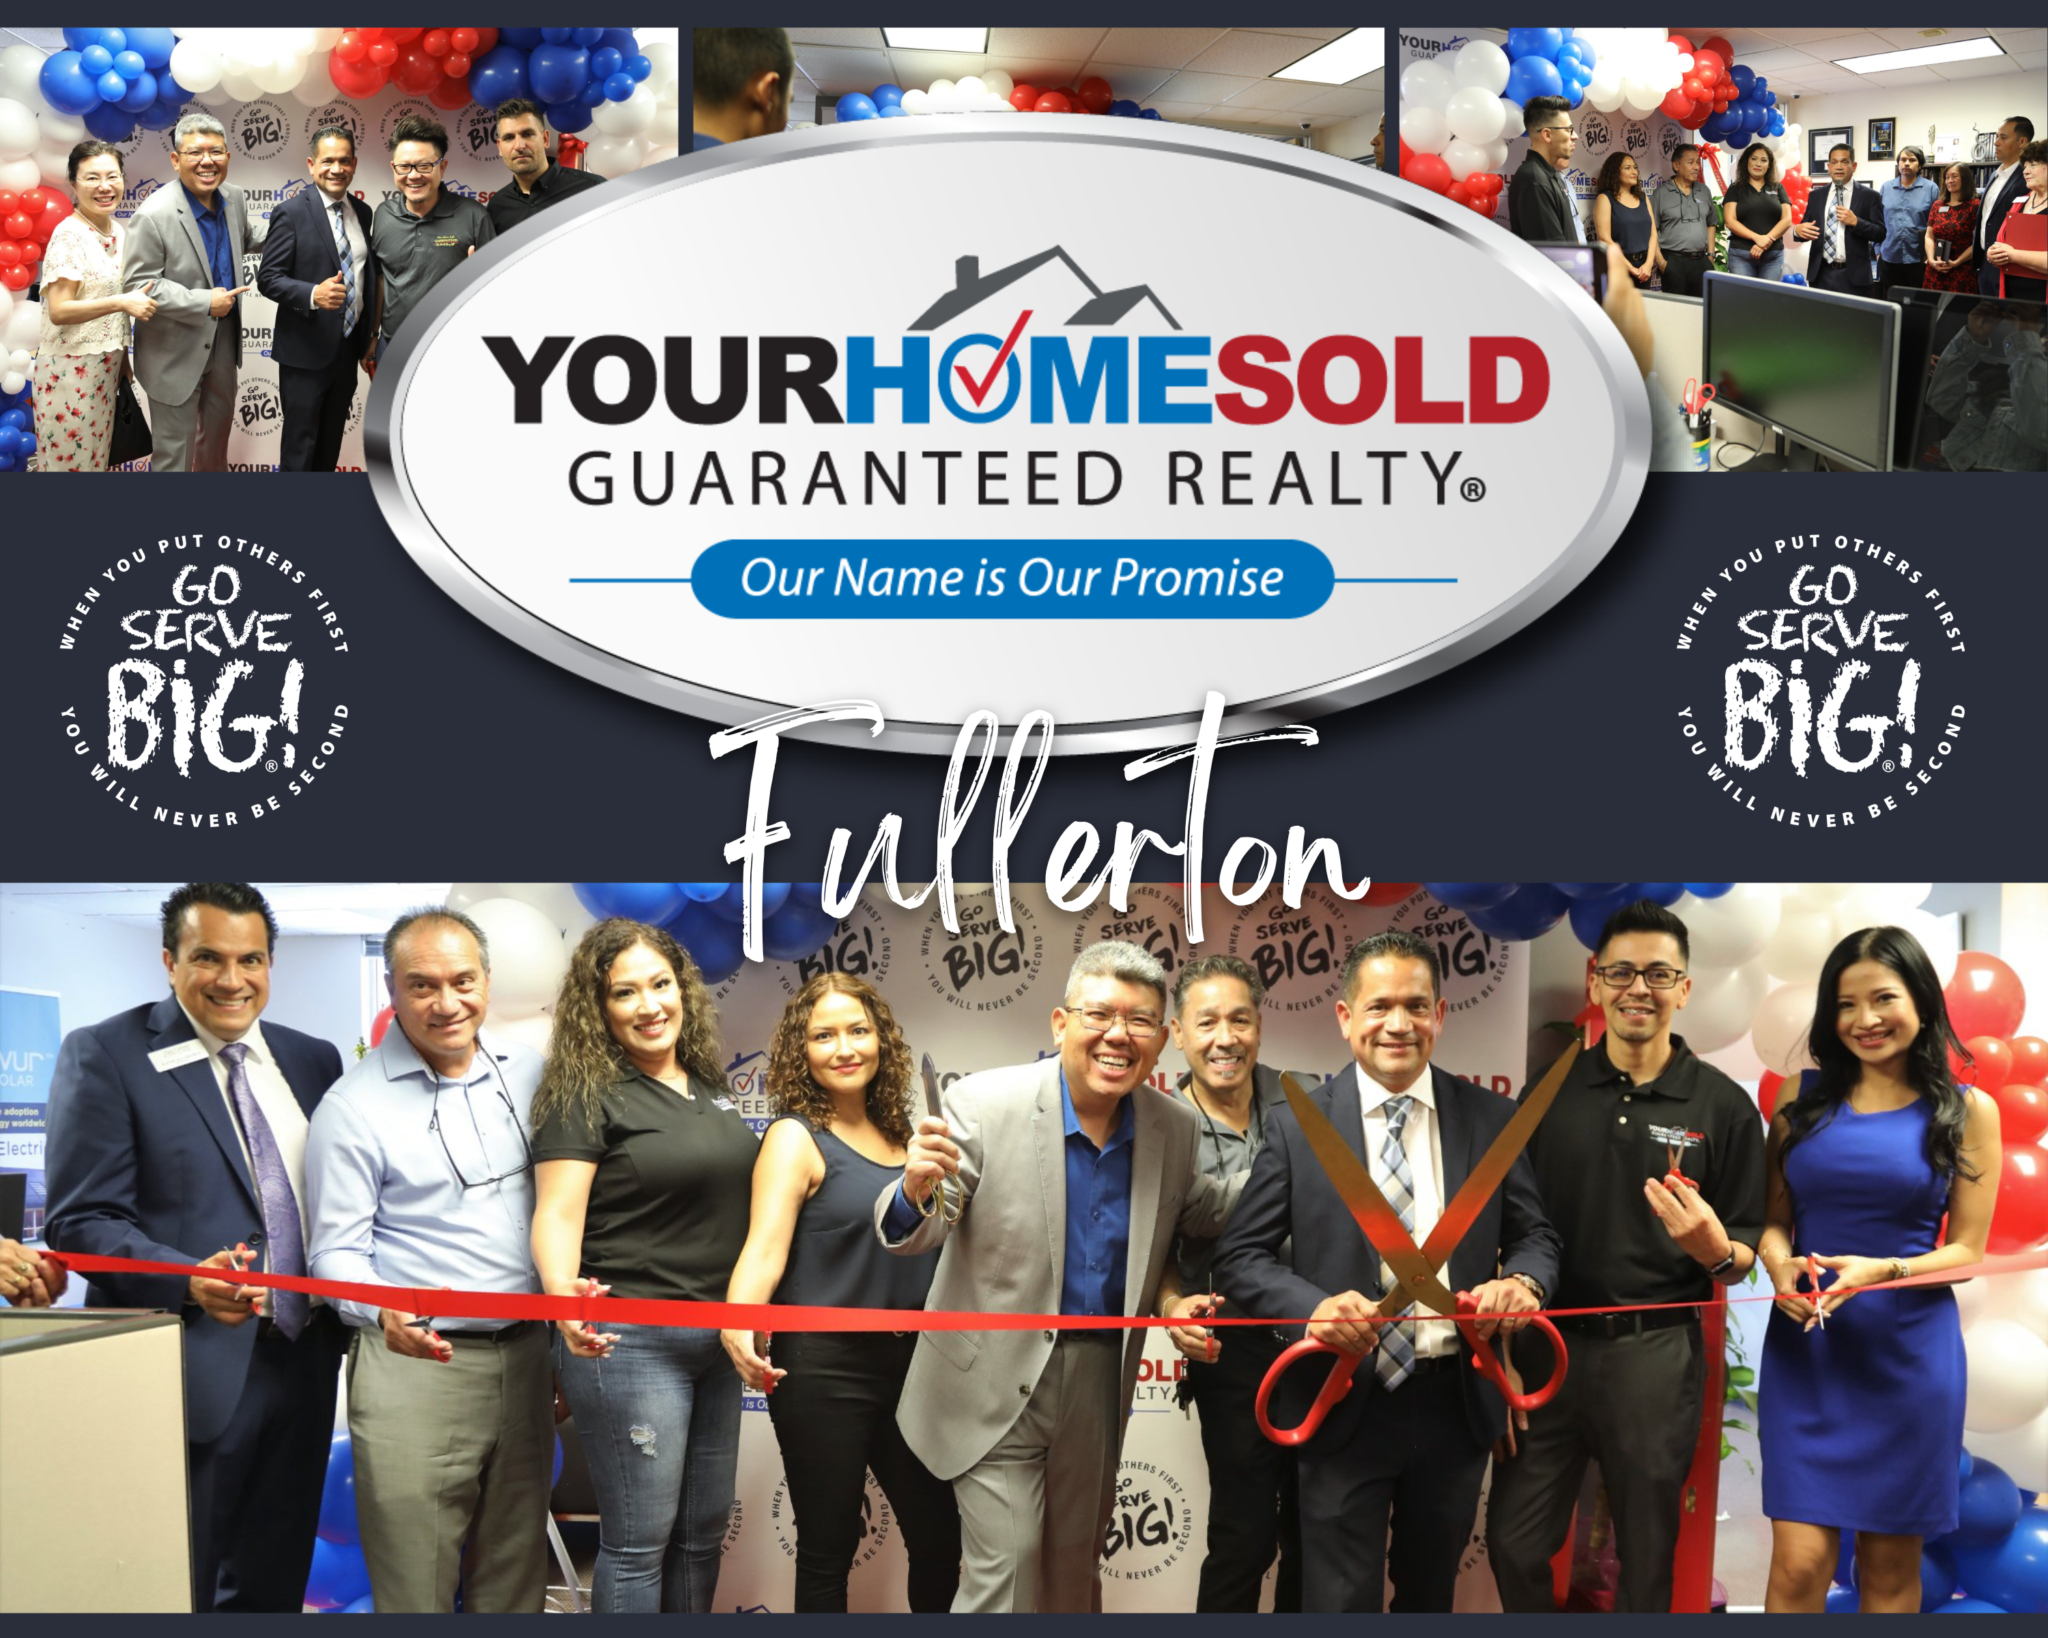 Your-Home-Sold-Guaranteed-Realty-Announces-Grand-Opening-of-New-Location-in-Fullerton-2048x1638.png